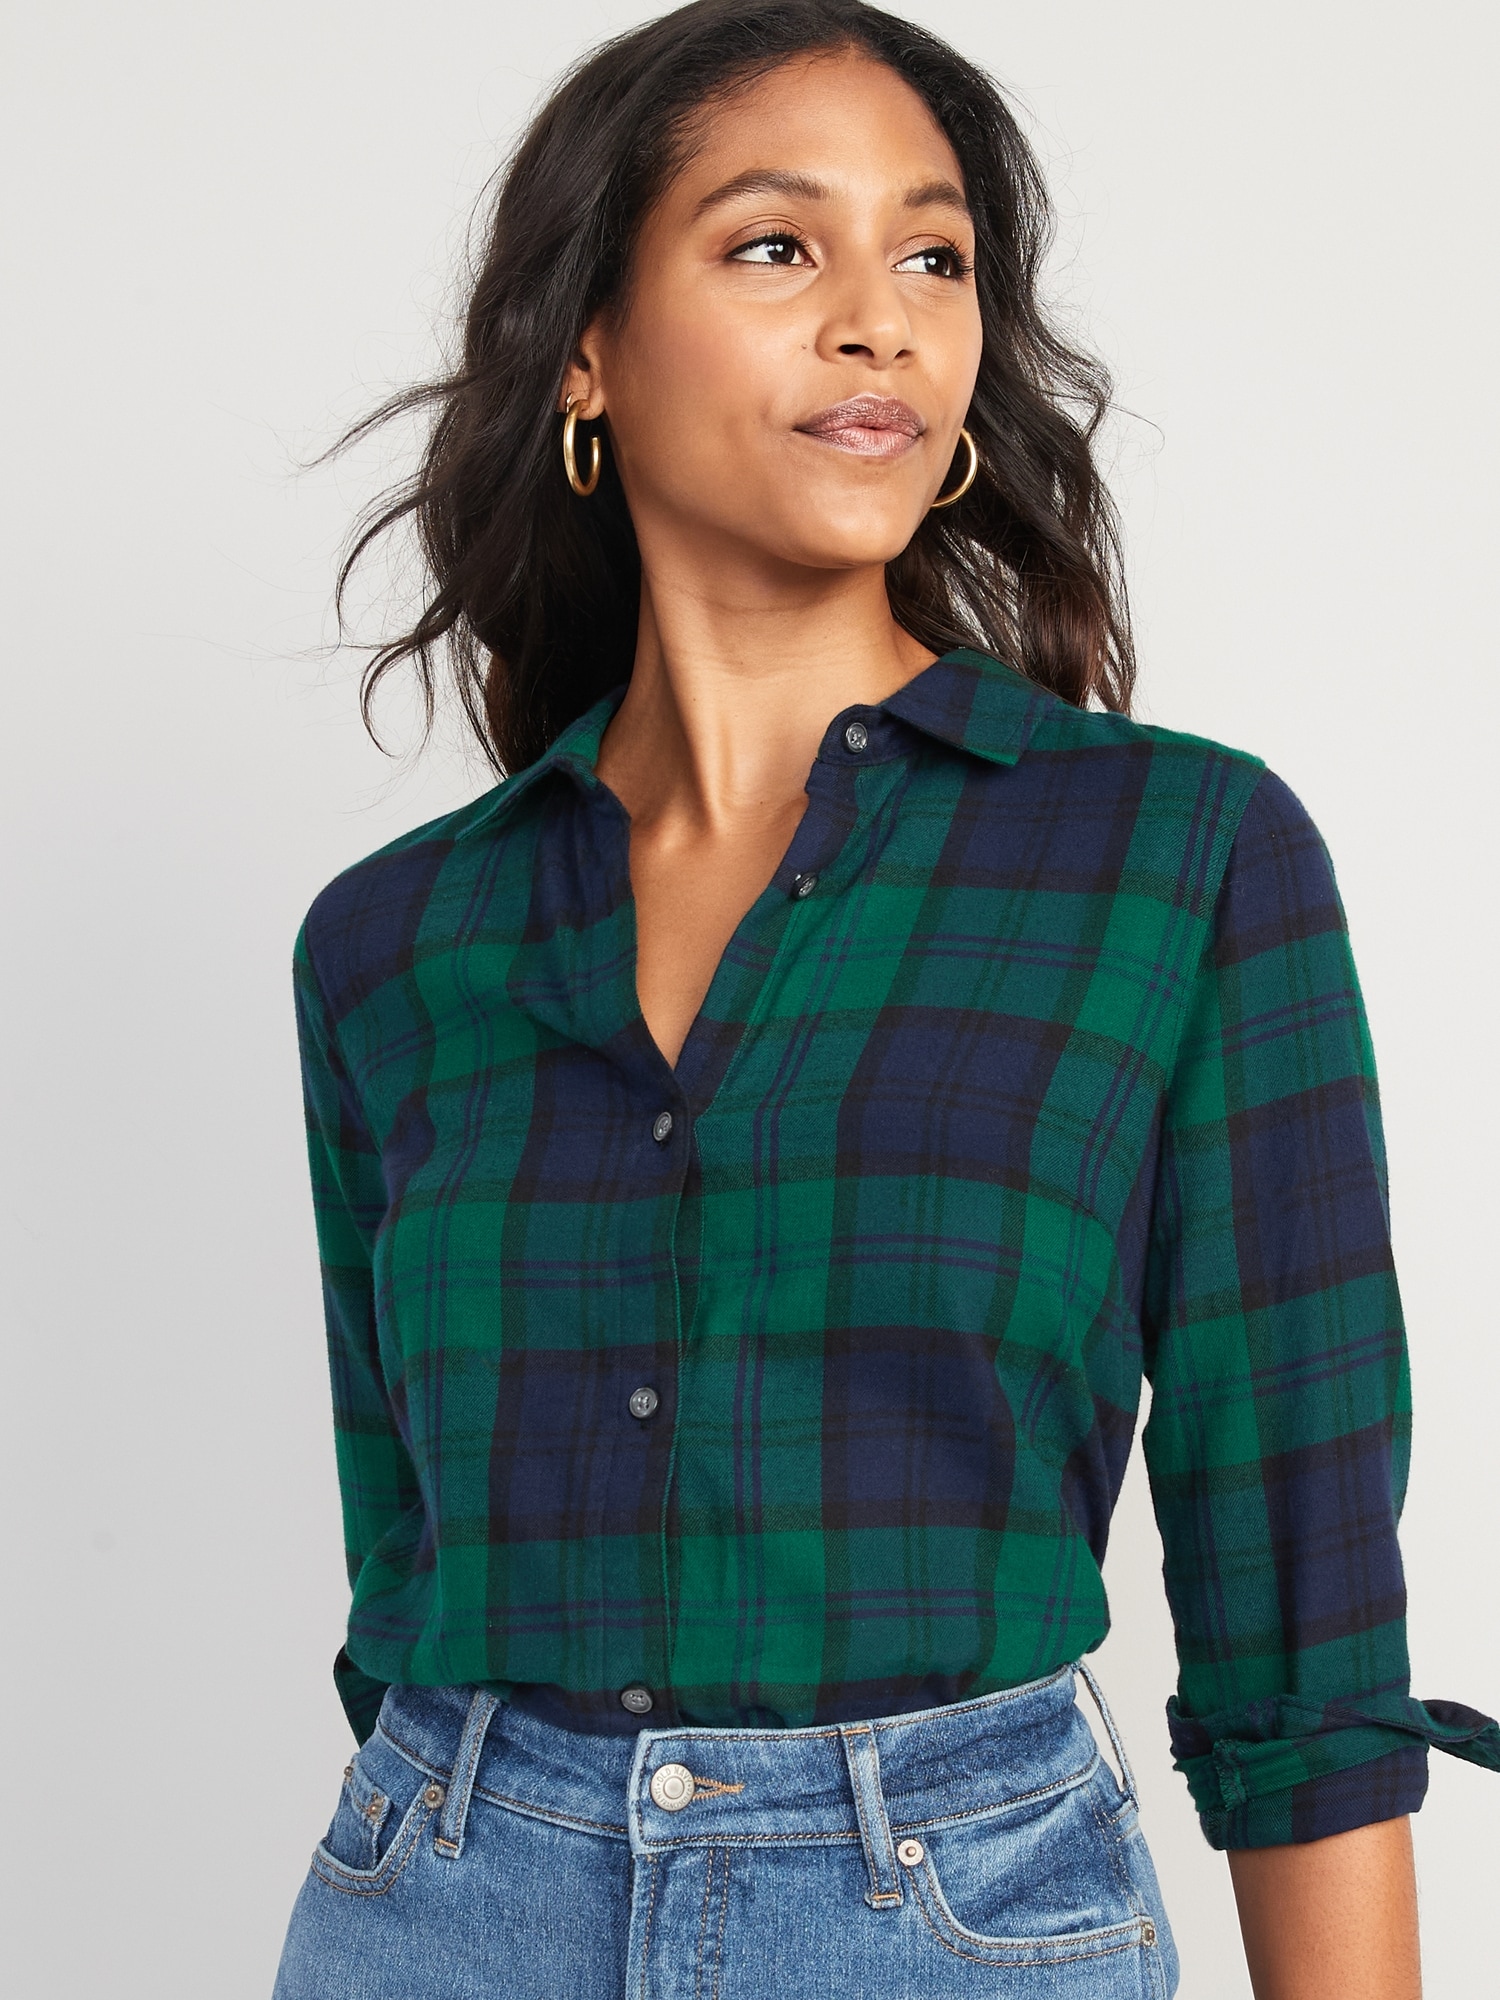 Flannel Shirts for Women, Shop Blouses, Shirts & Tops